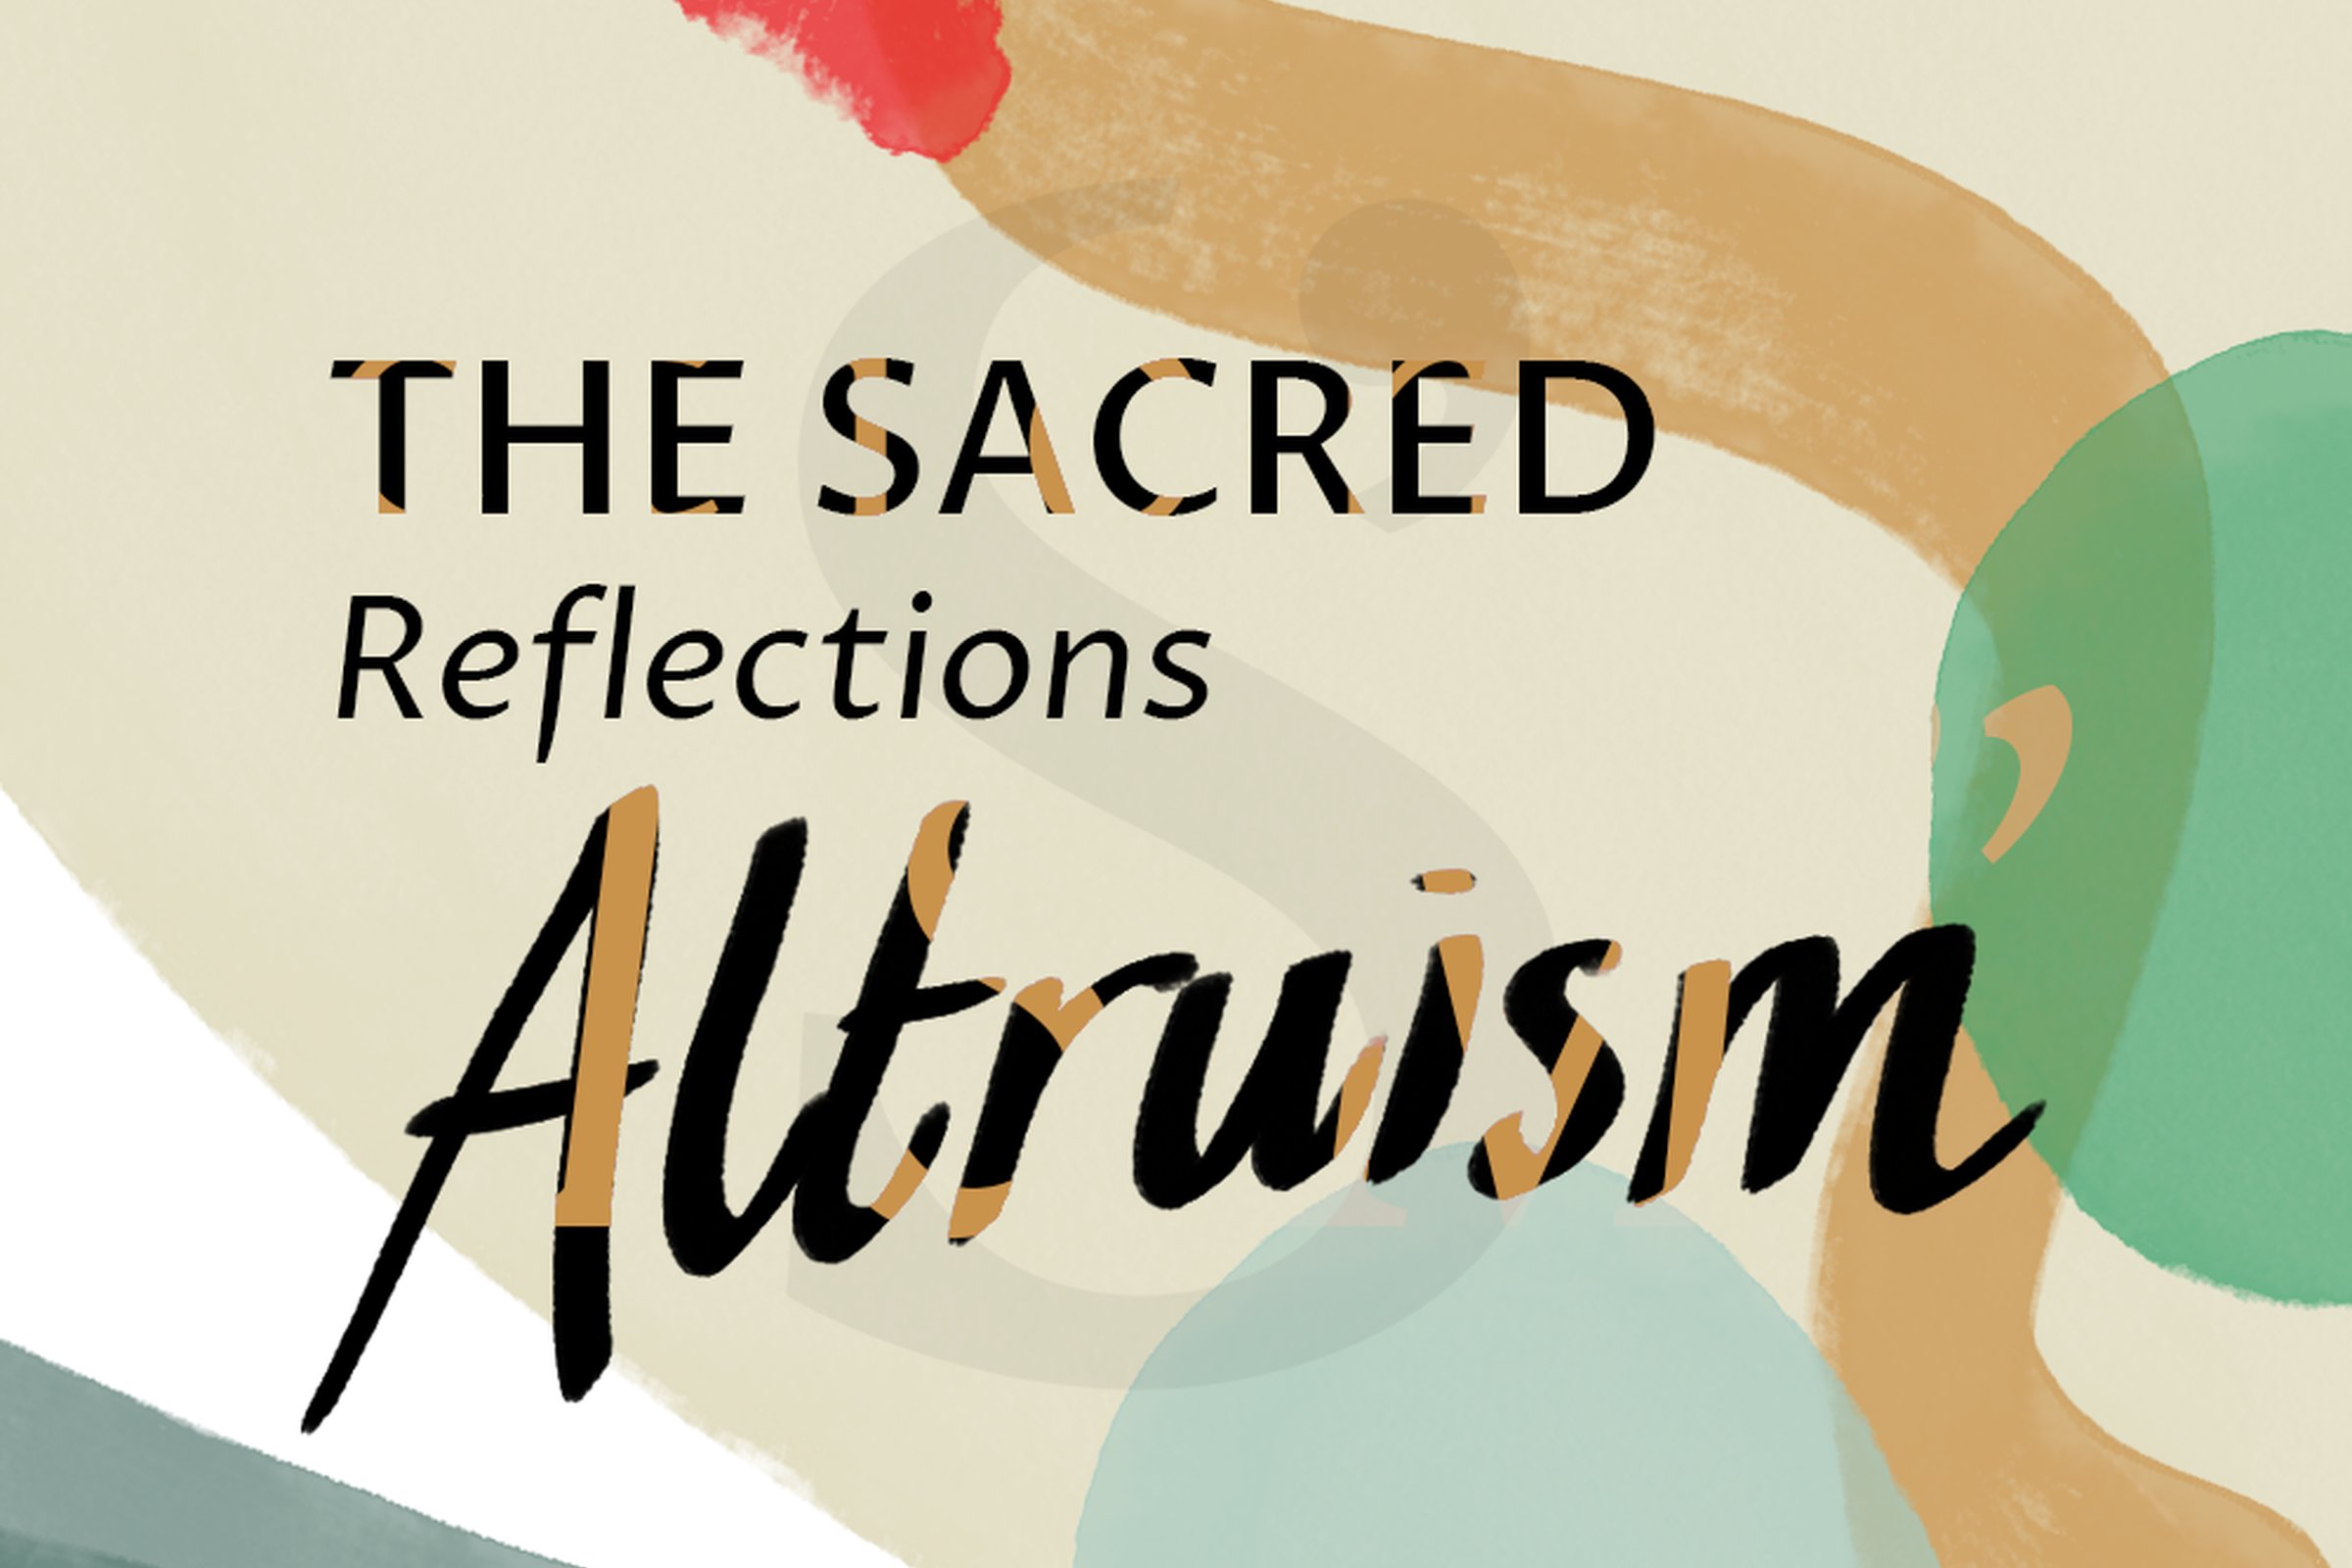 The Sacred Reflections: Altruism